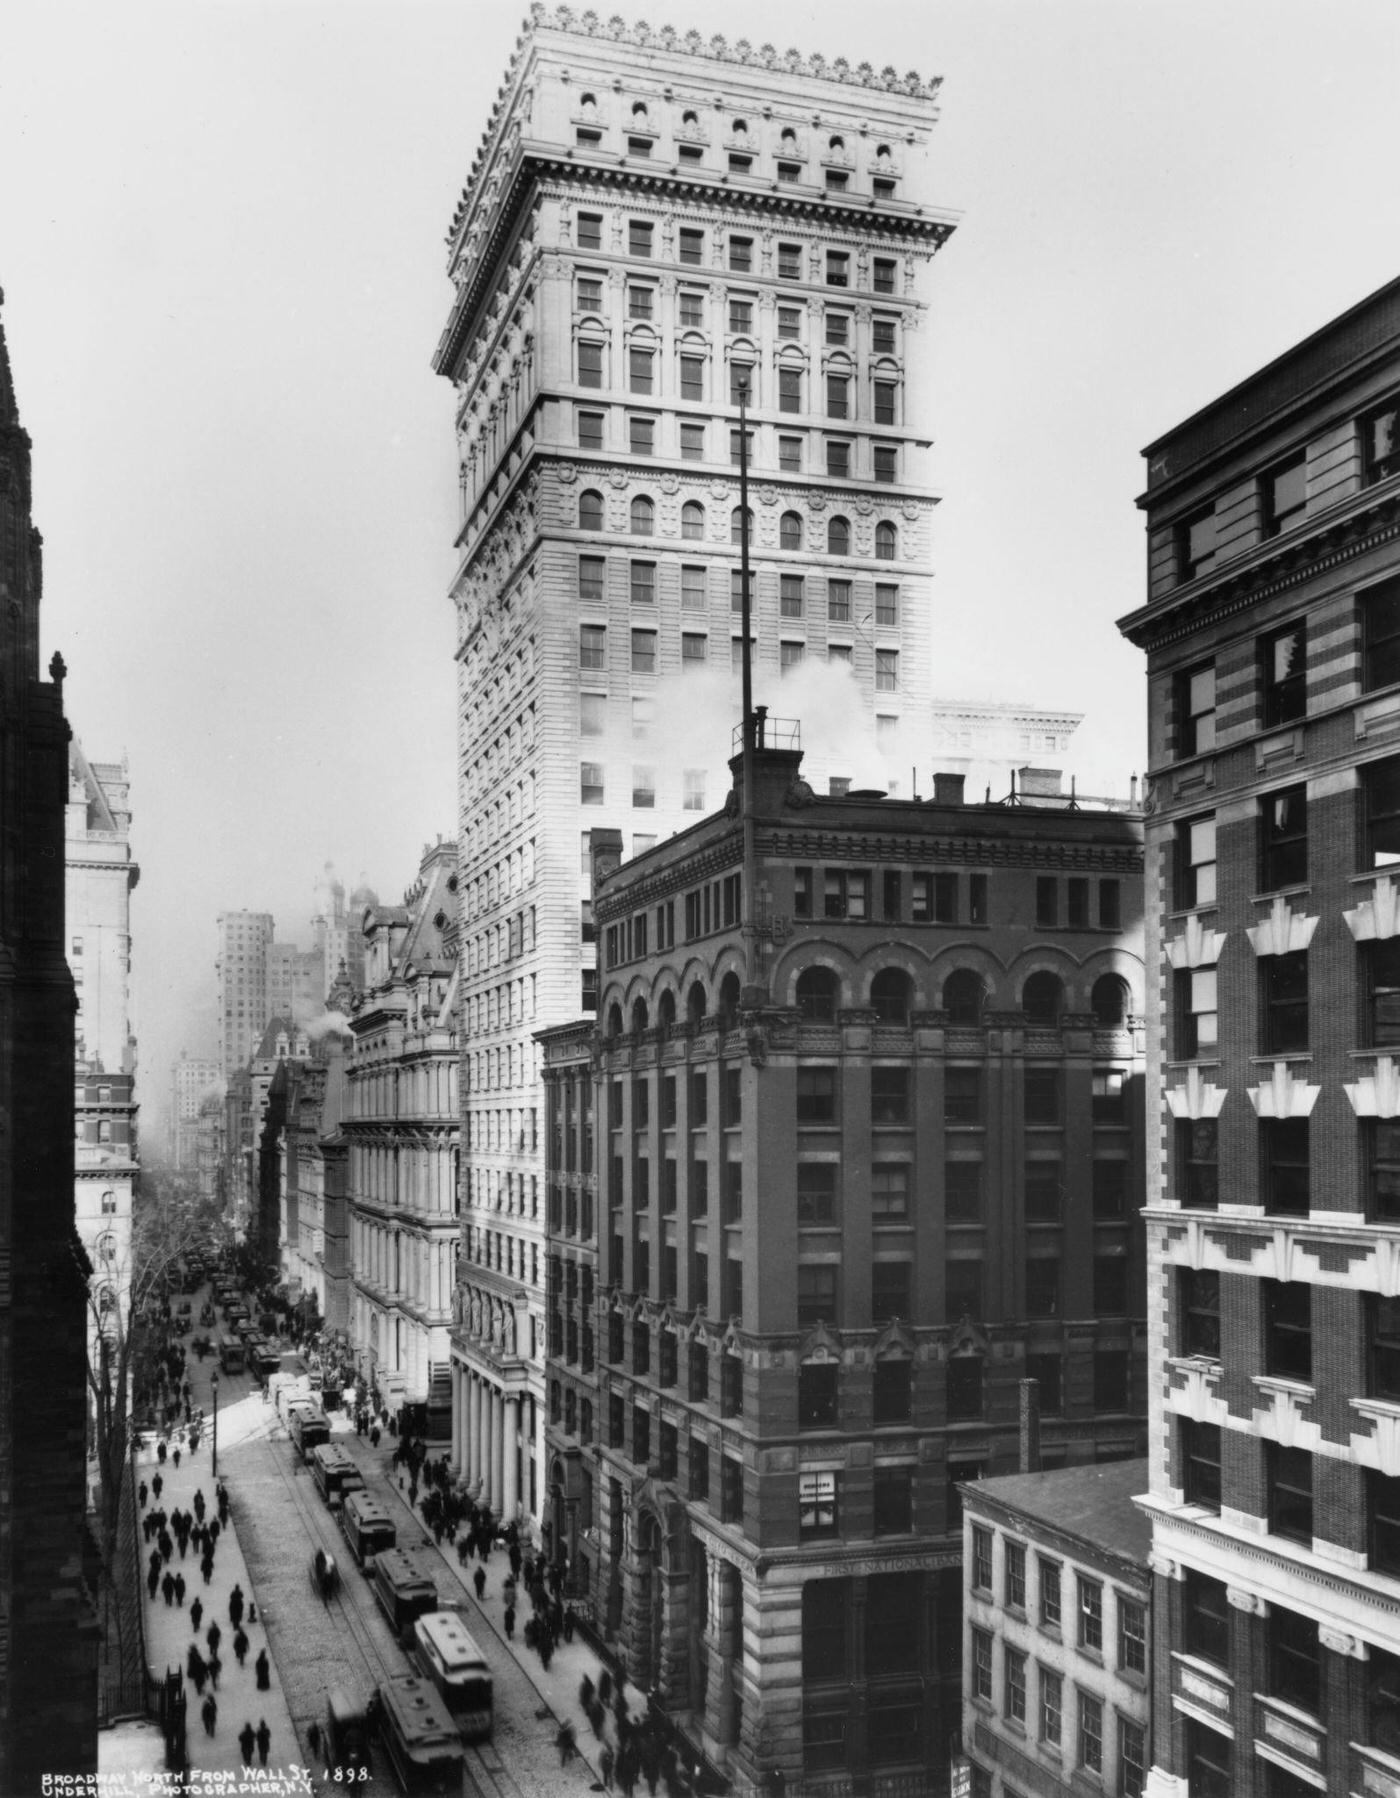 Broadway: Looking North From Wall Street, 1898.